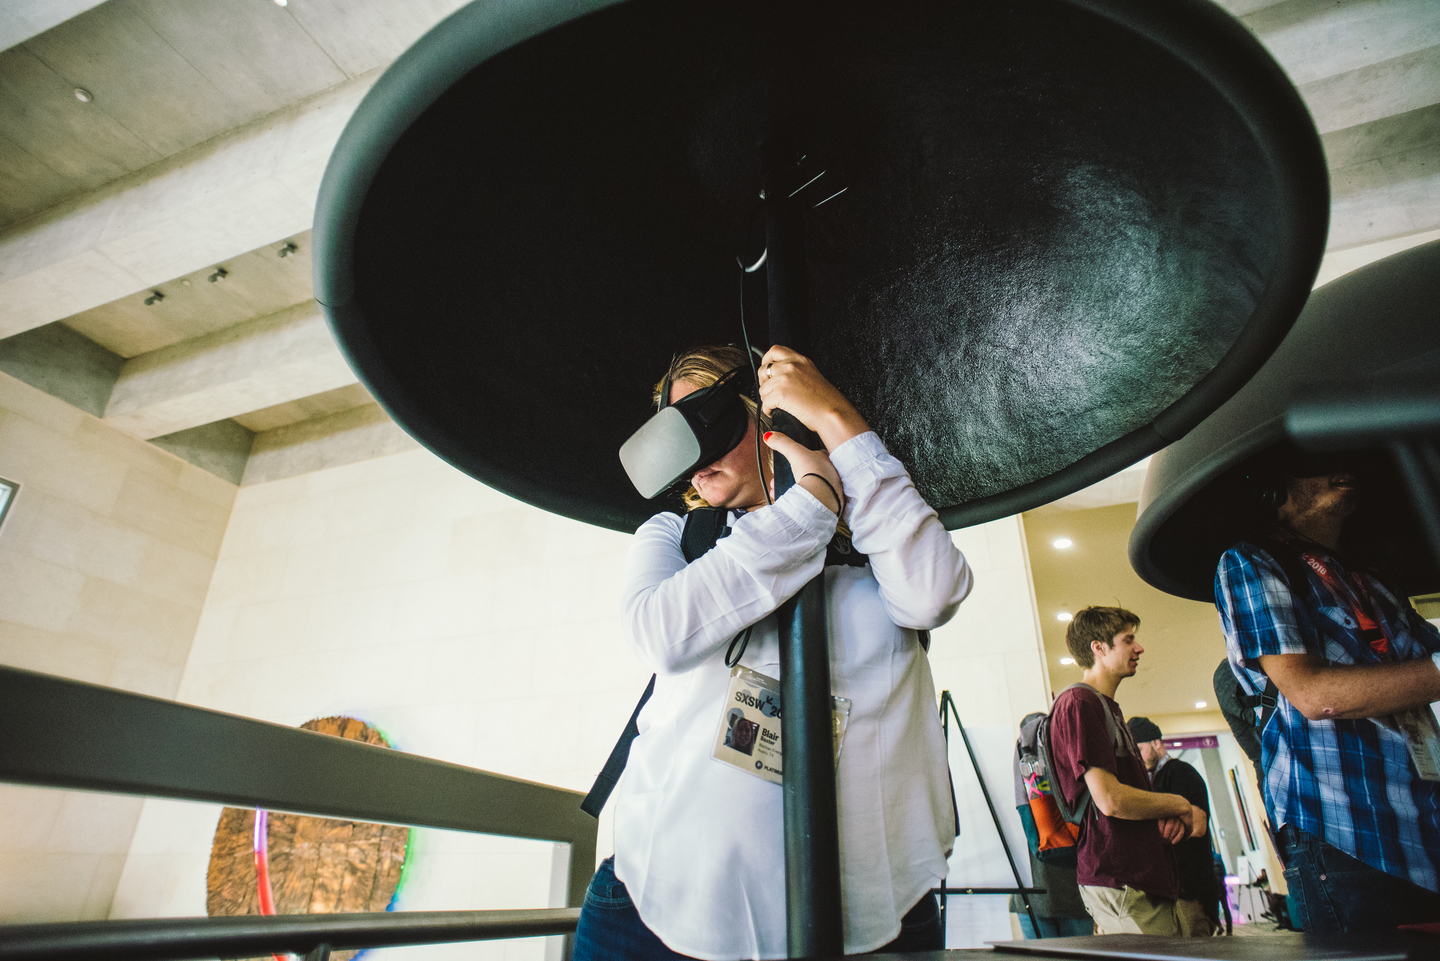 A visitor to the “A Colossal Wave” VR art exhibit at the Austin Convention Center. Photo by Letitia Smith